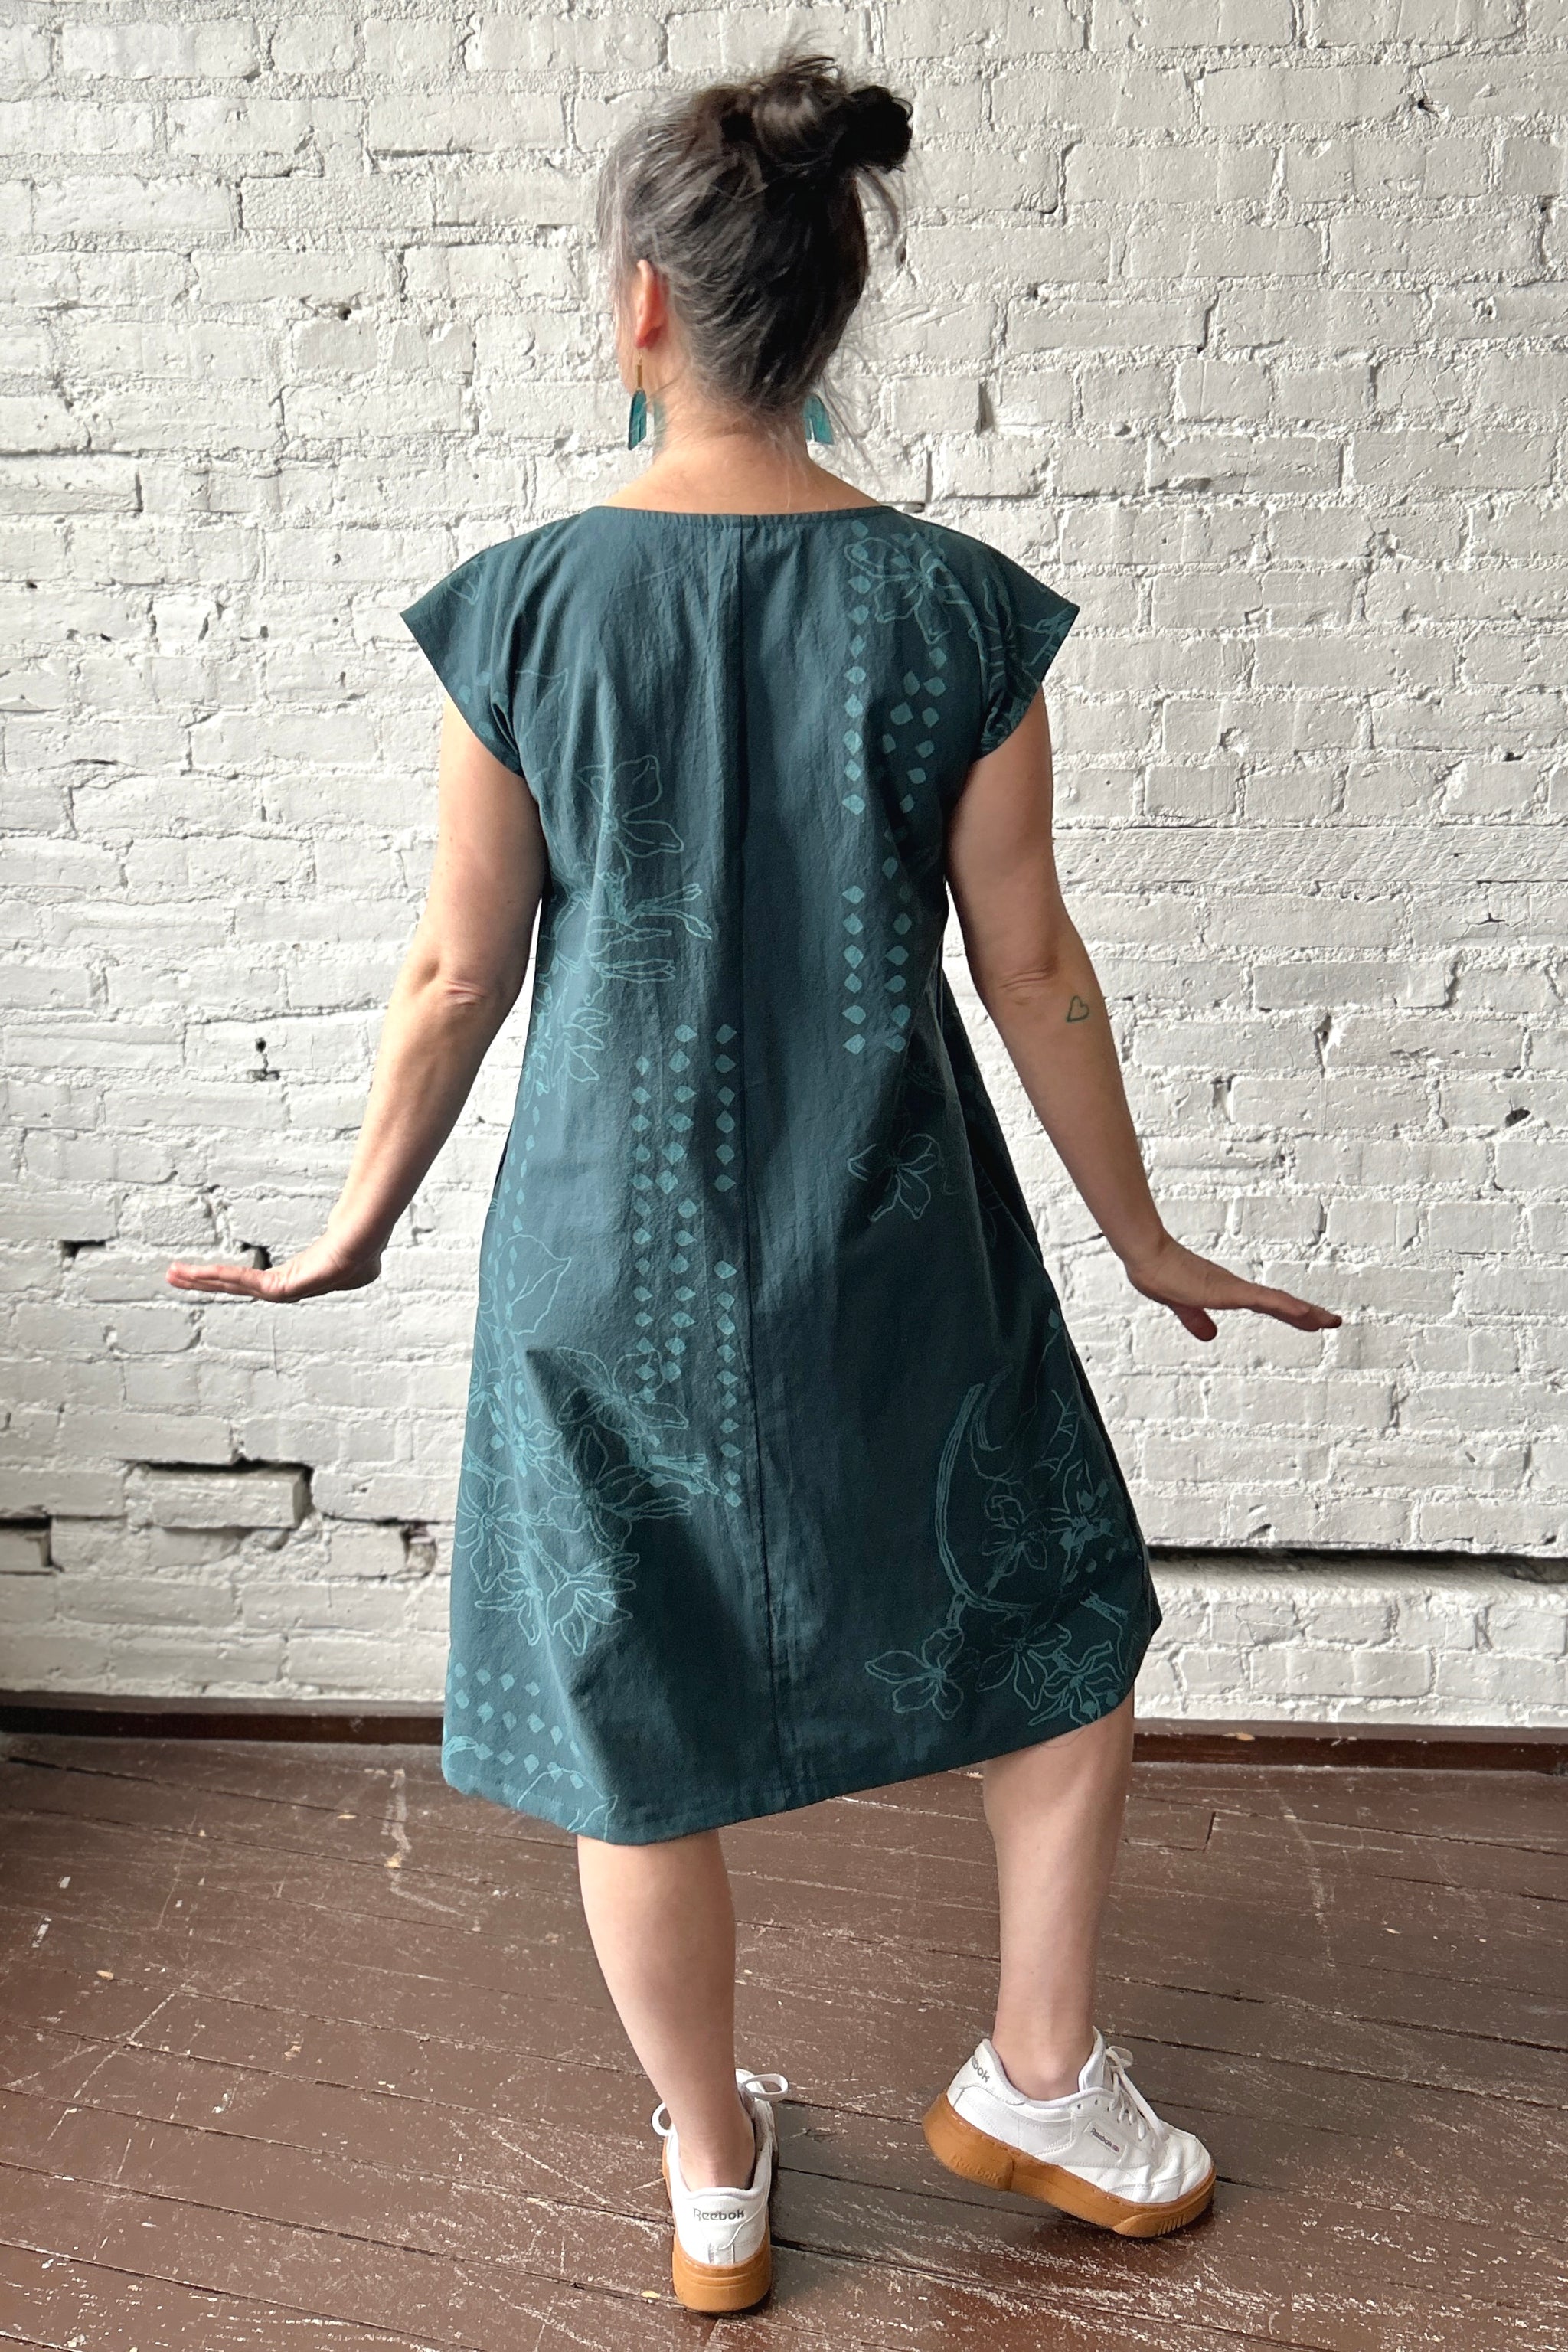 Shelter Dress - Teal Blossoms with Apple Seeds